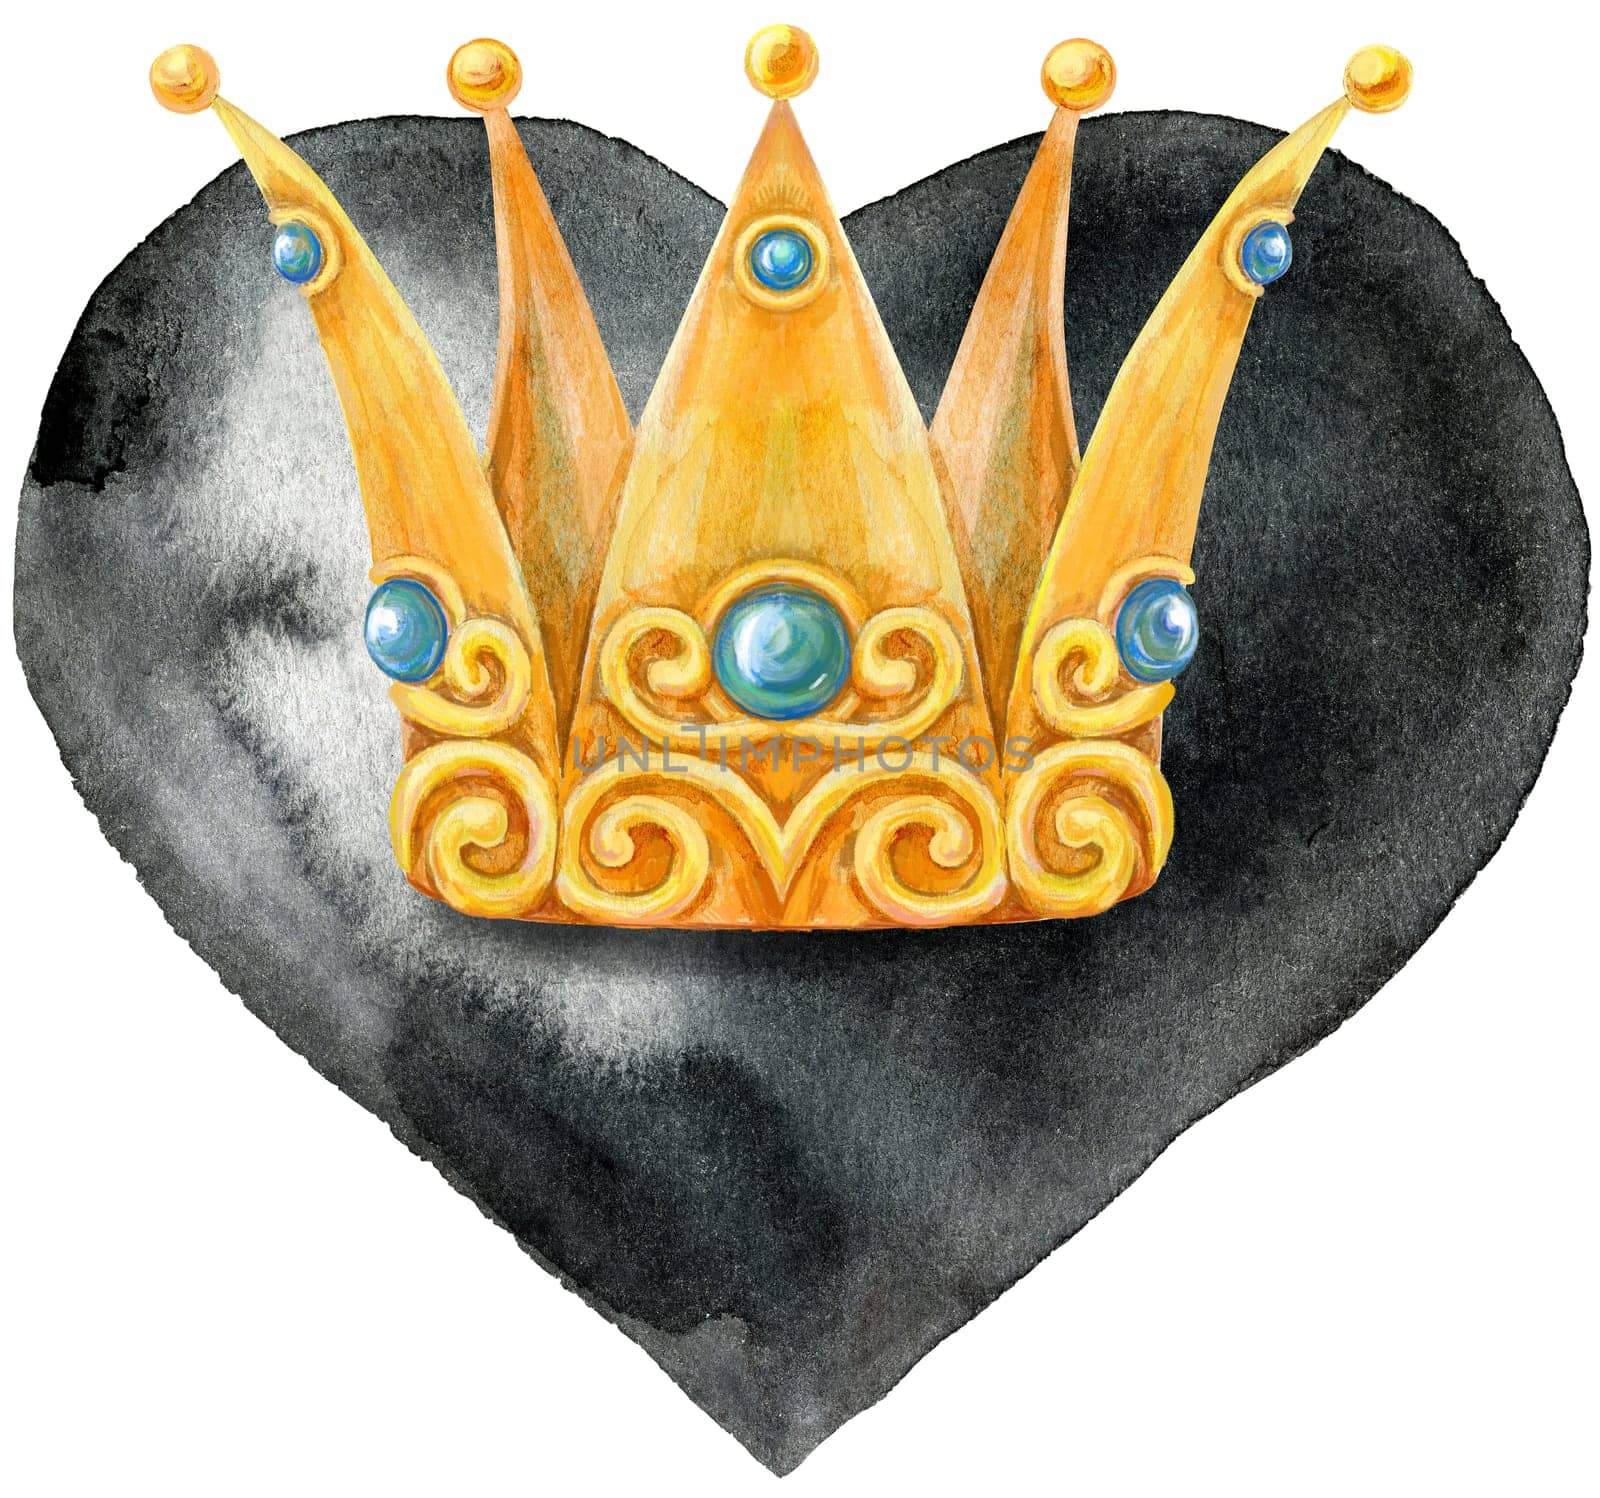 Watercolor black heart with golden crown, painted by hand